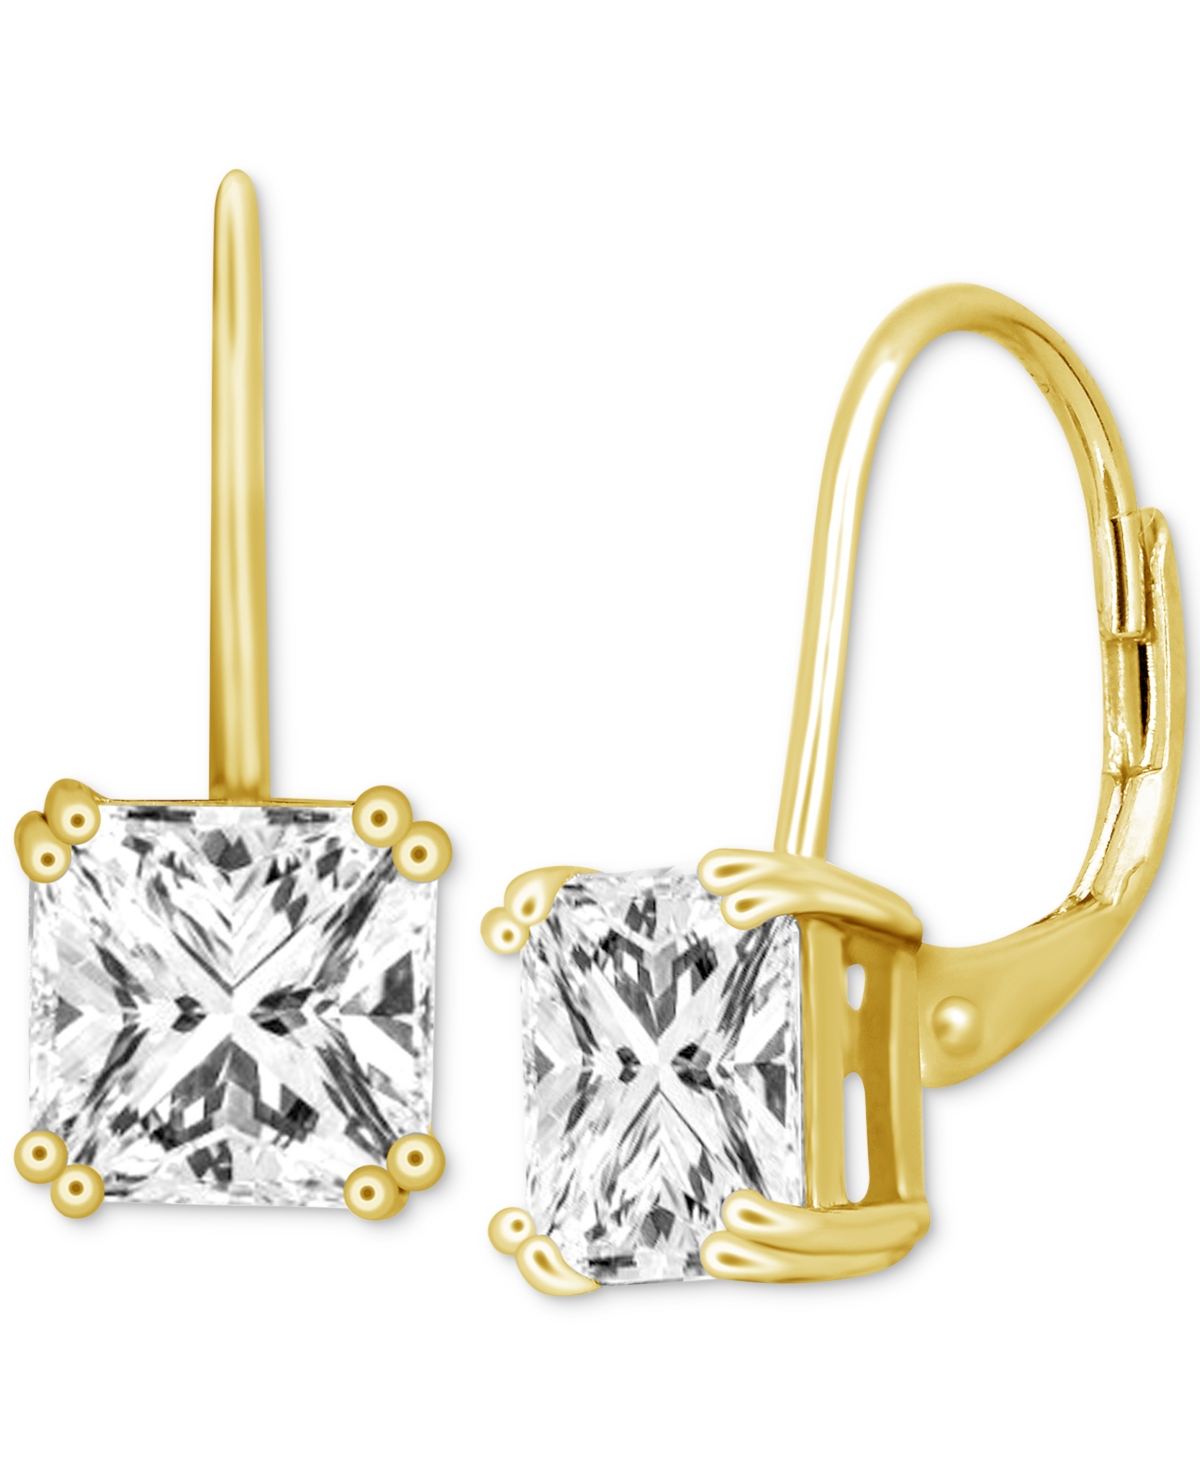 Cubic Zirconia Square Drop Earrings in Silver or Gold Plate - Gold